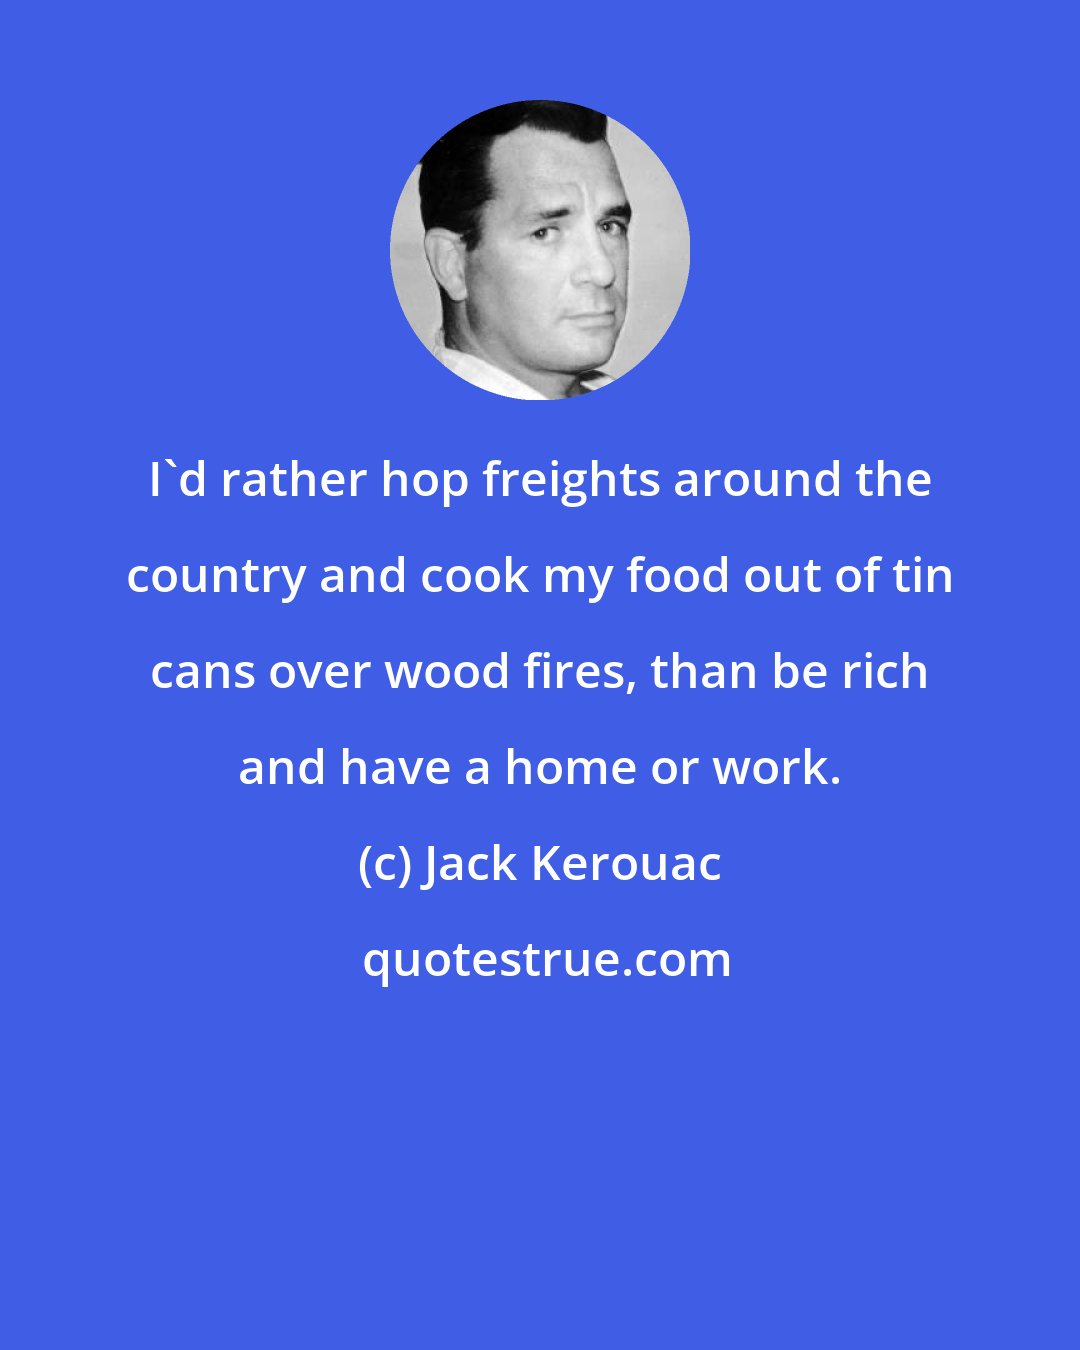 Jack Kerouac: I'd rather hop freights around the country and cook my food out of tin cans over wood fires, than be rich and have a home or work.